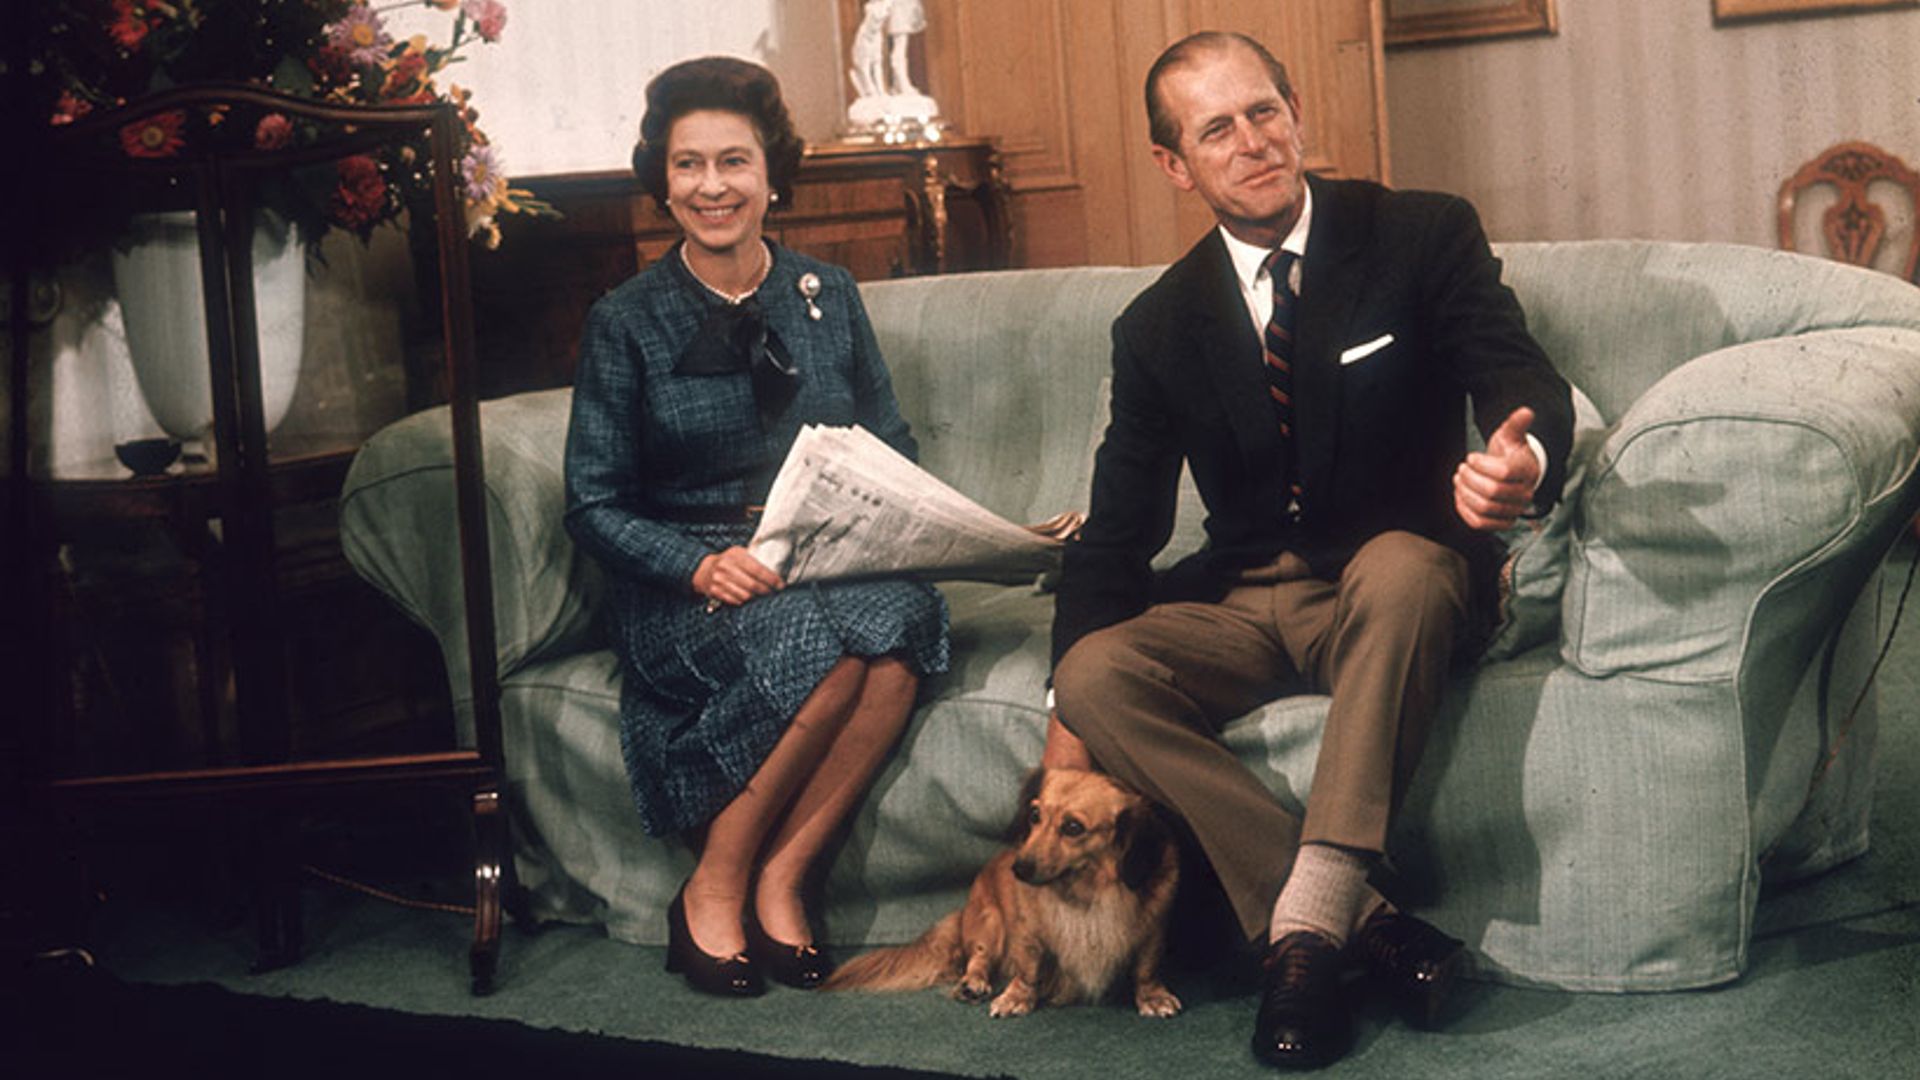 The Queen and Prince Philip: the youthful romance that became an enduring love match